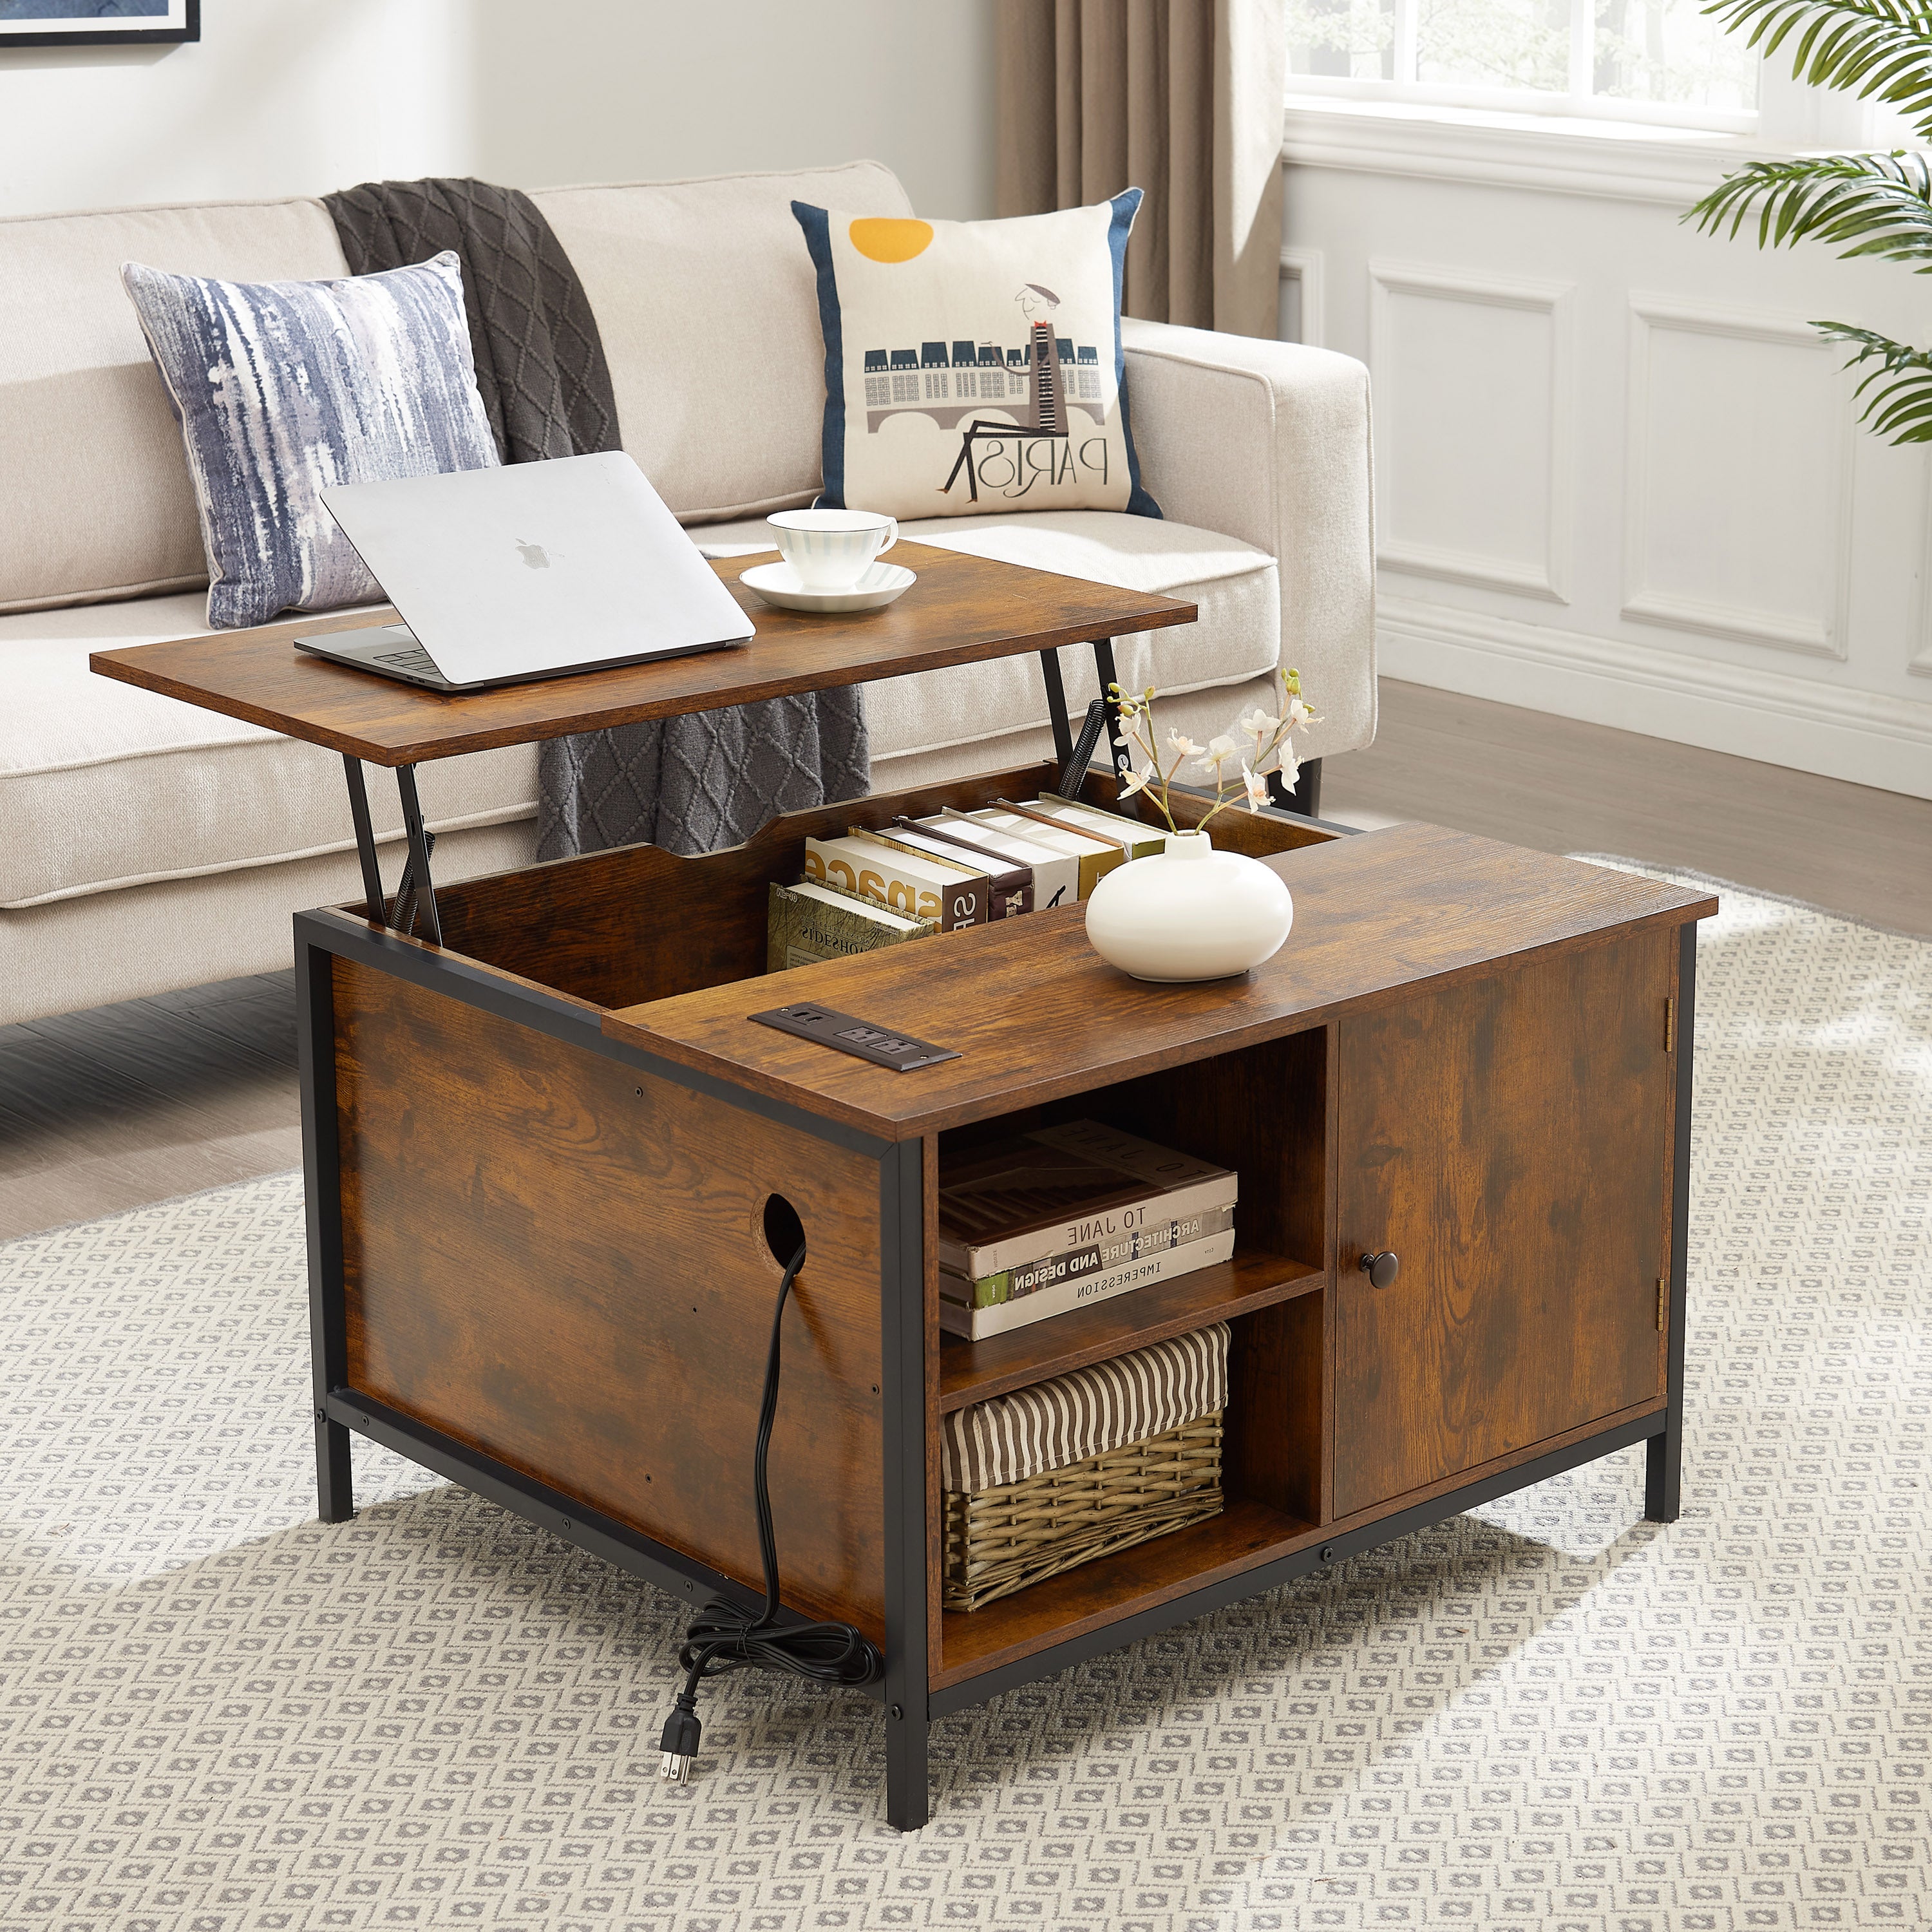 🆓🚛 Lift Top Coffee Table, Multi-Function Coffee Table With Hidden Compartment, Modern Lift Tabletop Dining Table for Living Room Reception/Home Office, Rustic Brown